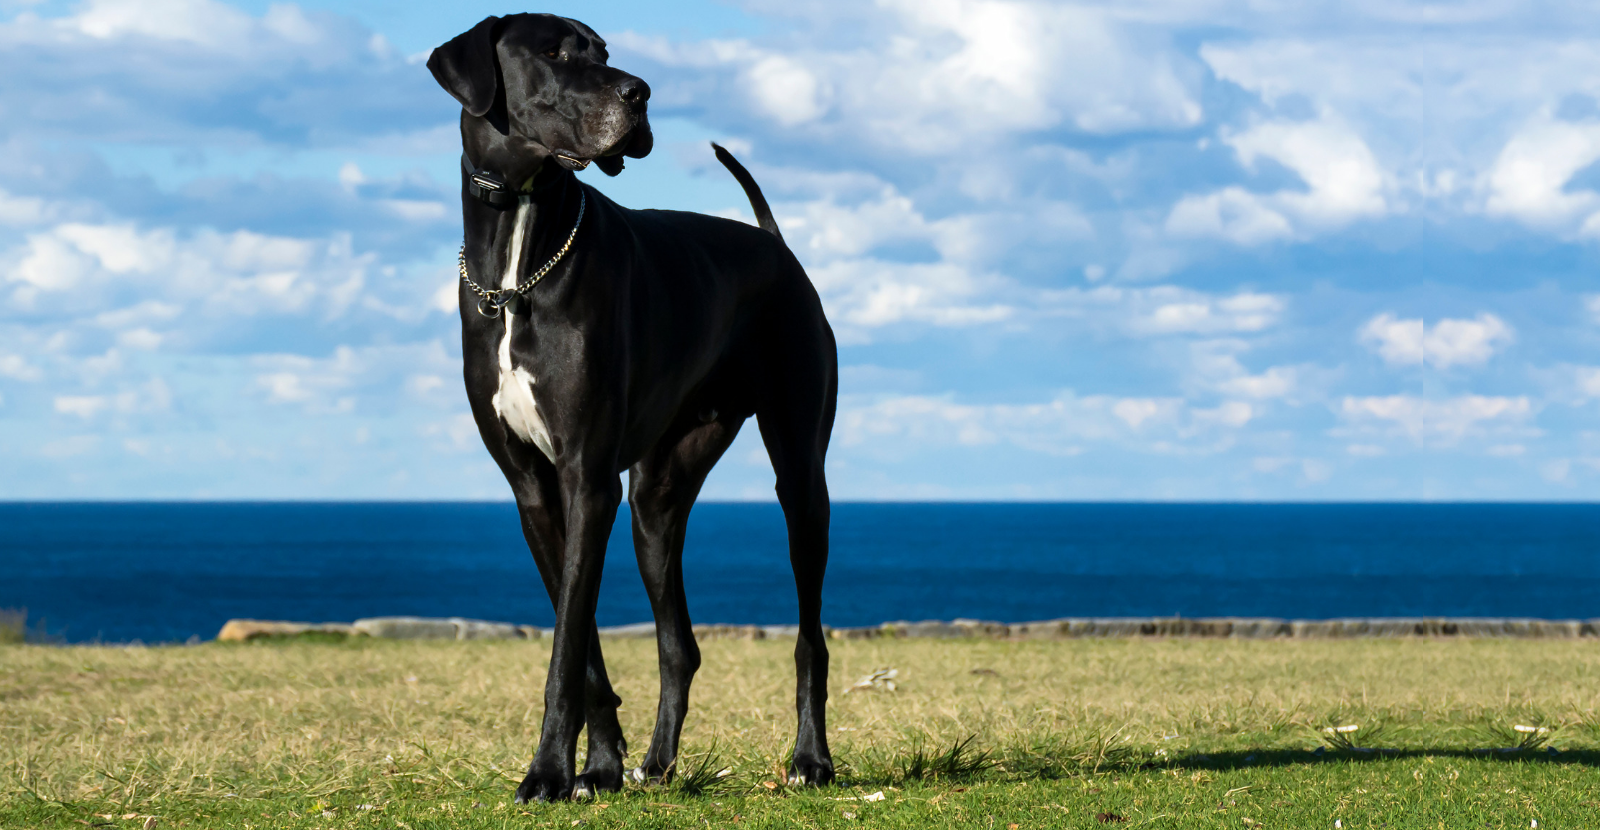 glucosamine for great danes